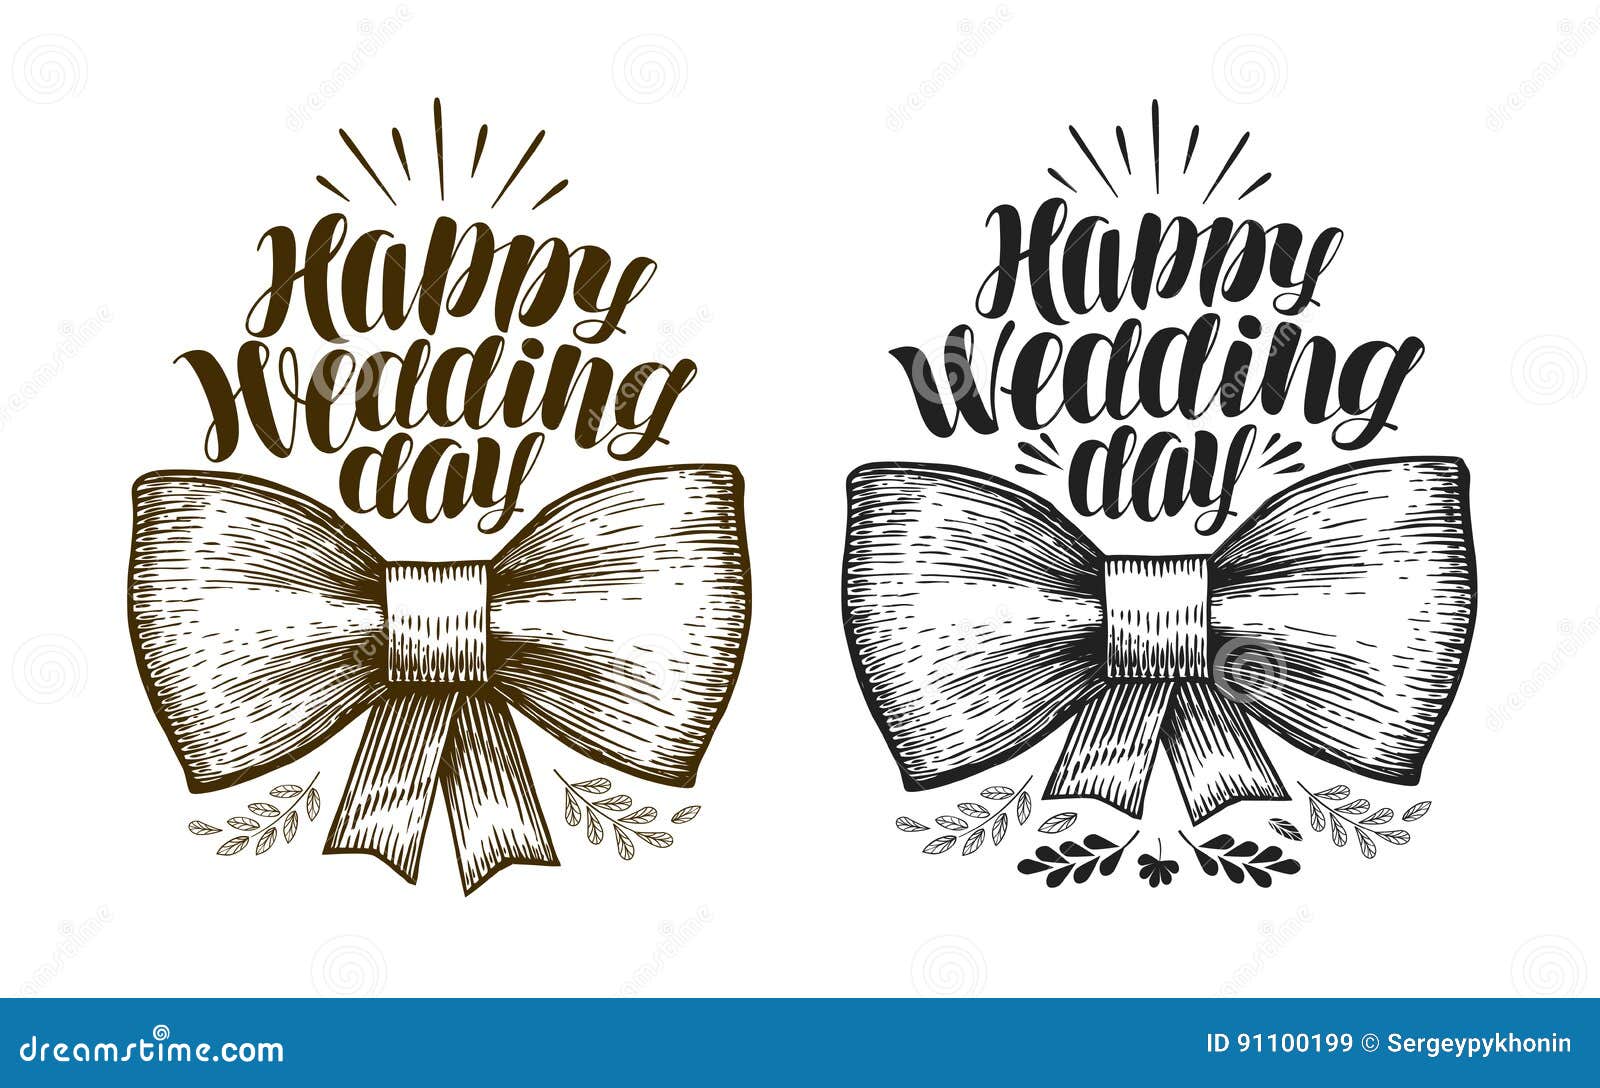 happy wedding day, label. marriage, wed banner. lettering, calligraphy  